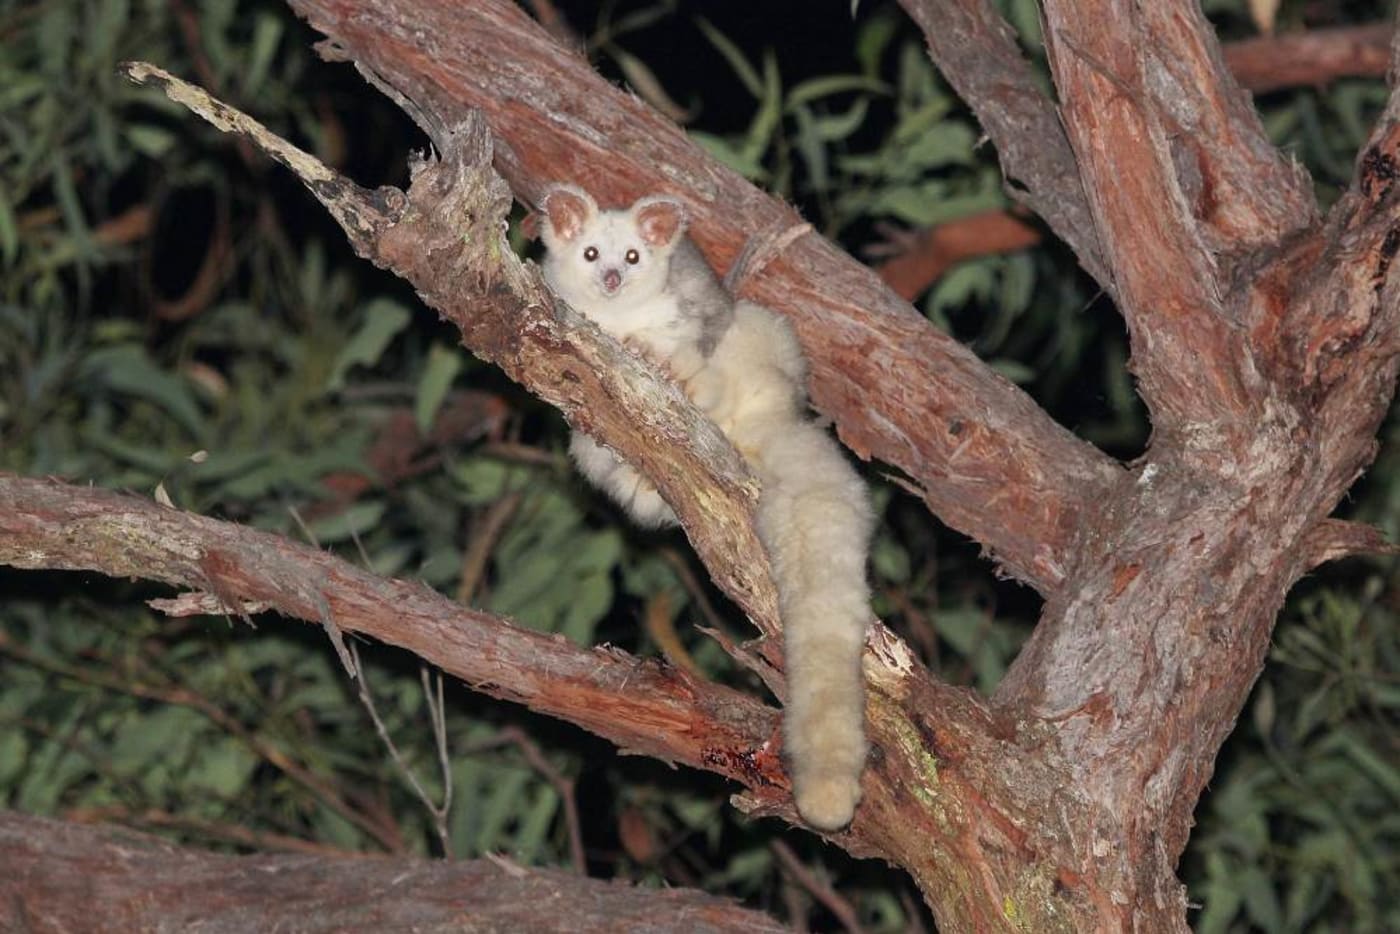 Greater Glider spotted in the Blue Mountains= NSW